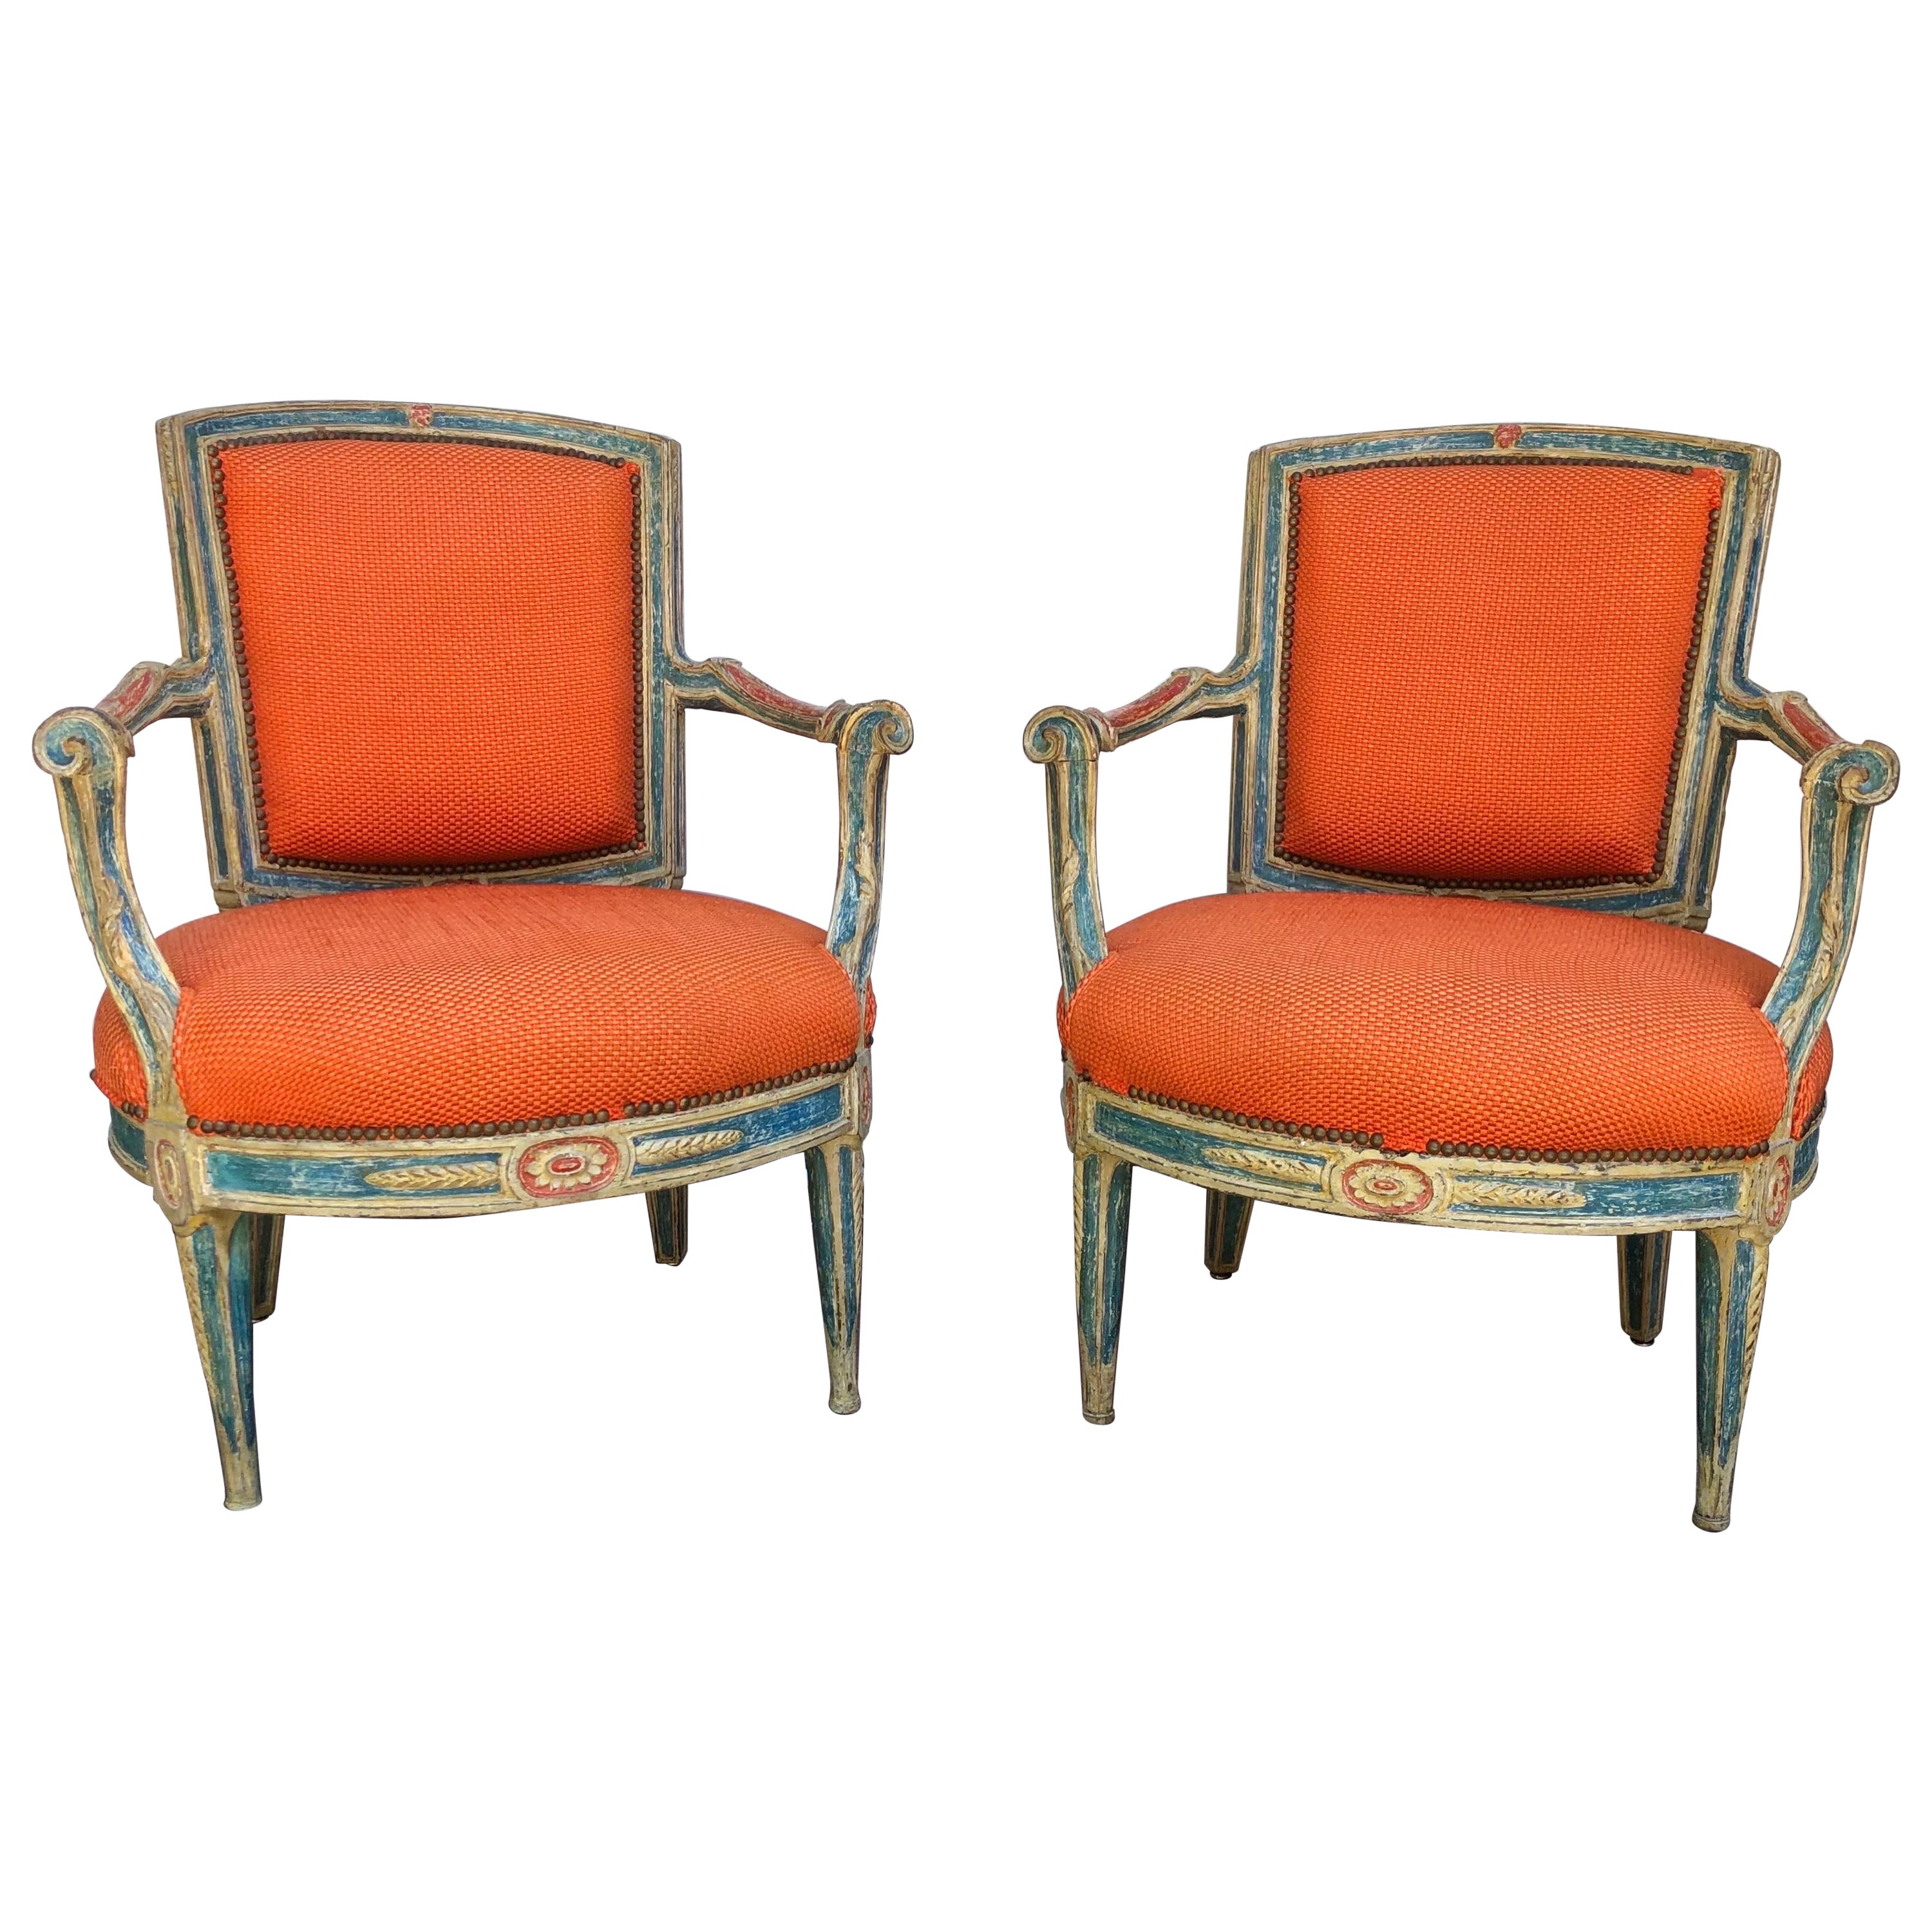 18th C. Pair of Italian Neoclassical Paint Decorated Armchairs For Sale